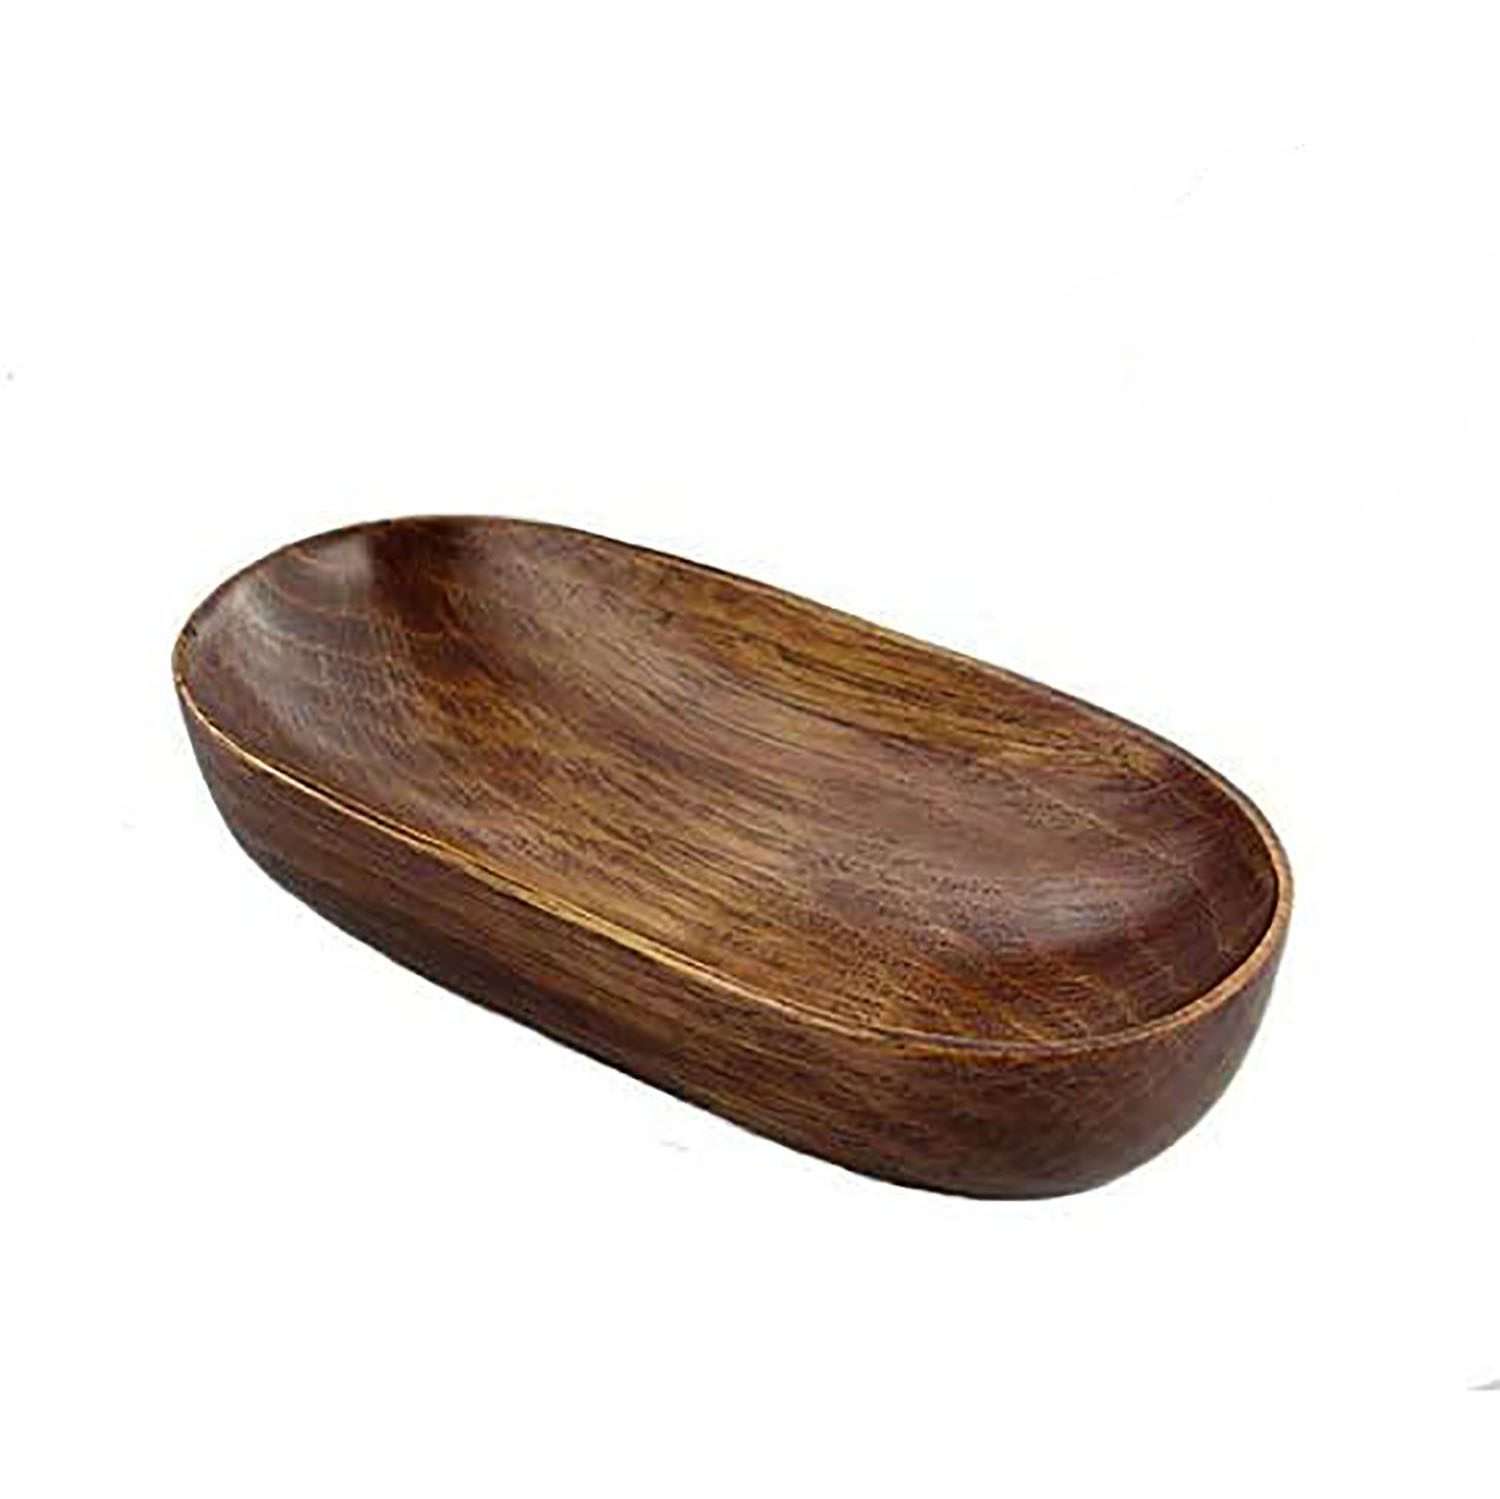 Boat Shape Wooden Candle Bowl Tray Small Wooden Bowls For Candle Catchall Storage